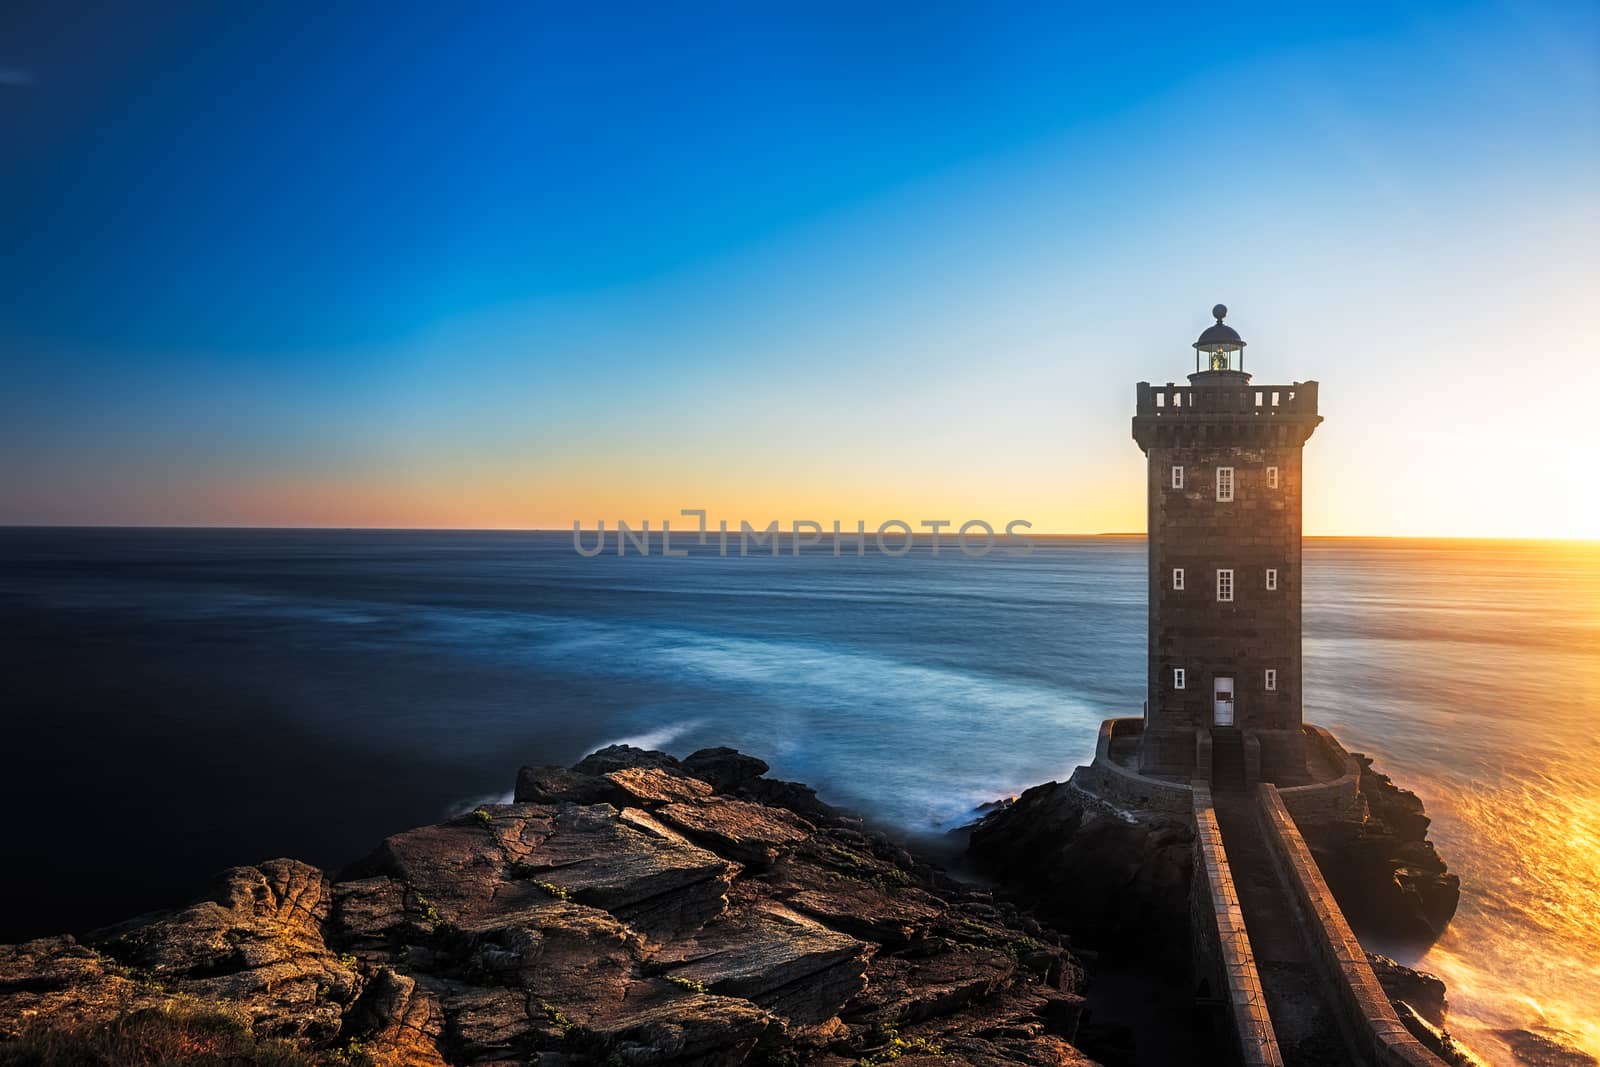 Kermorvan Lighthouse before sunset, Brittany, France by fisfra